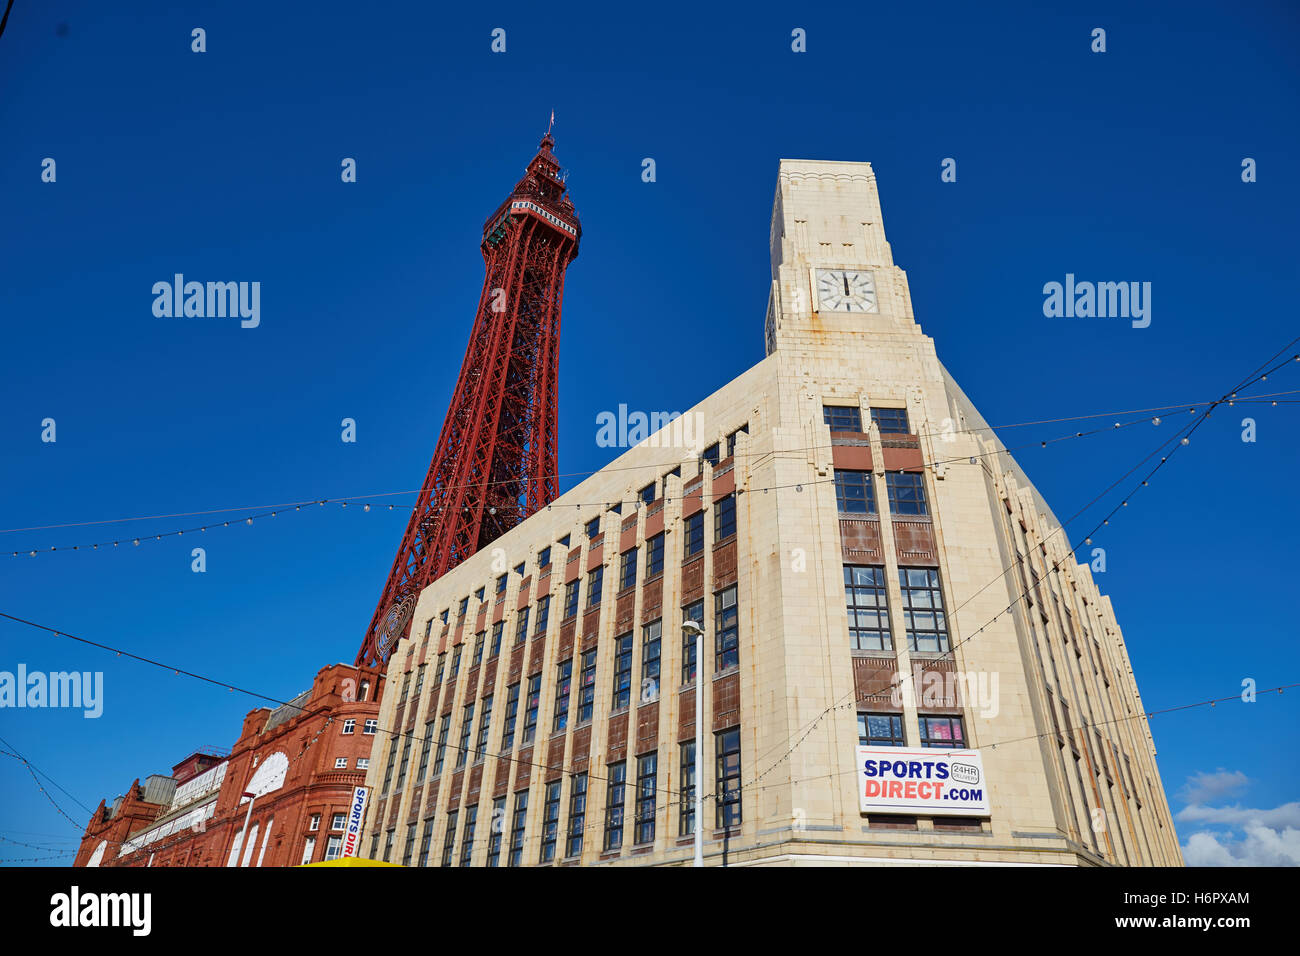 Blackpool ftower art deco building front   Holiday sea side town resort Lancashire tourist attractions  tower copyspace blue sky Stock Photo